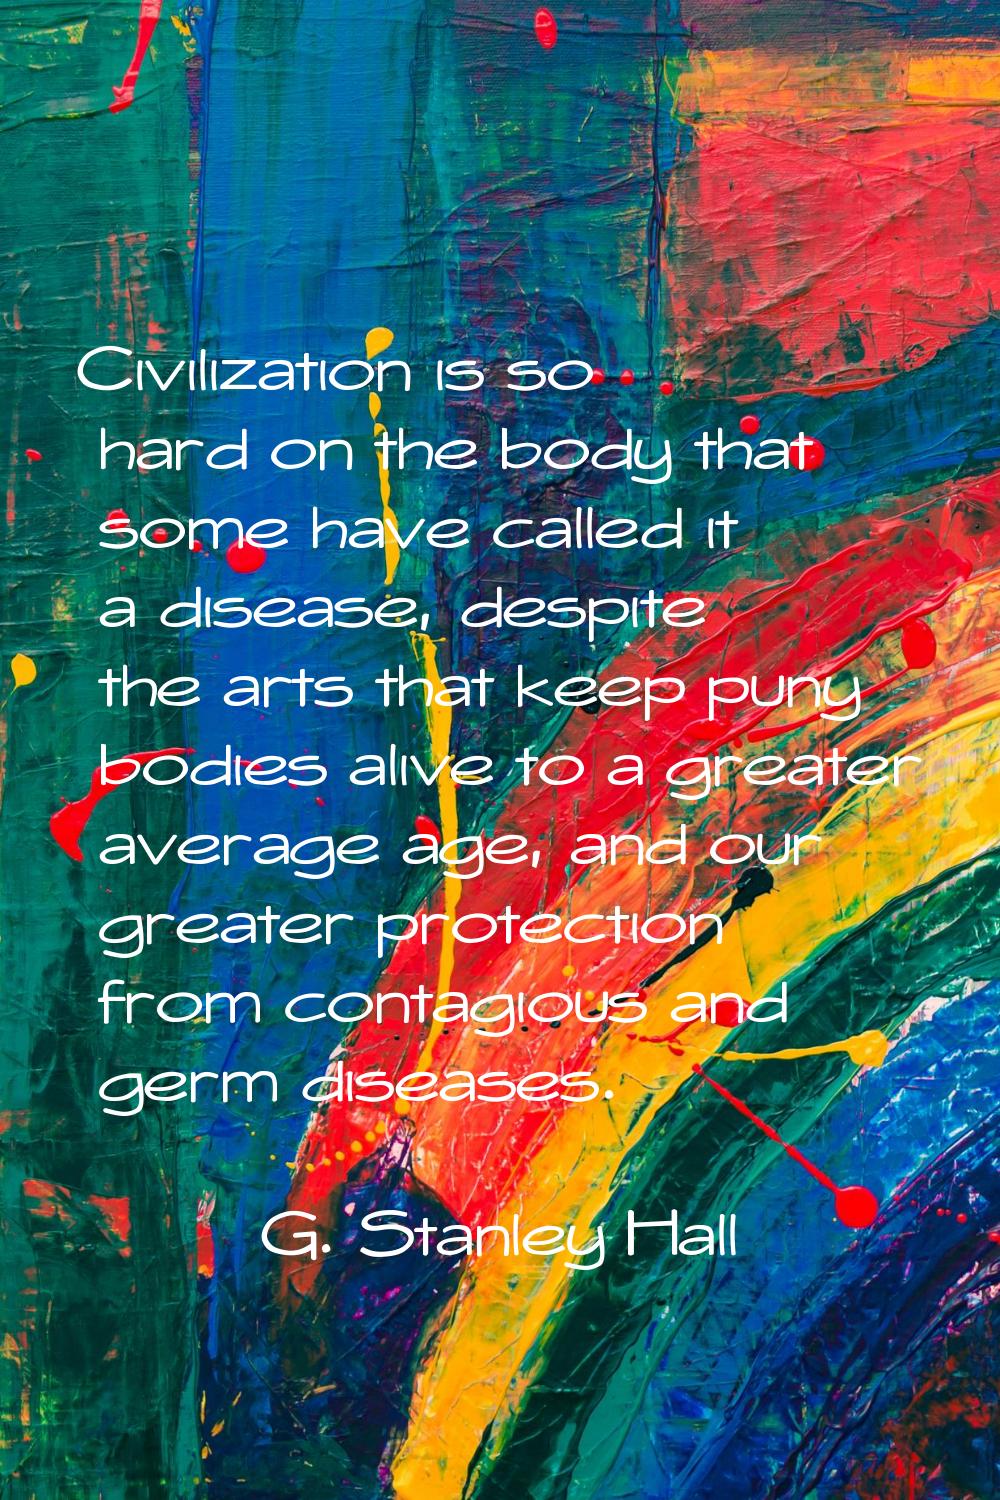 Civilization is so hard on the body that some have called it a disease, despite the arts that keep 